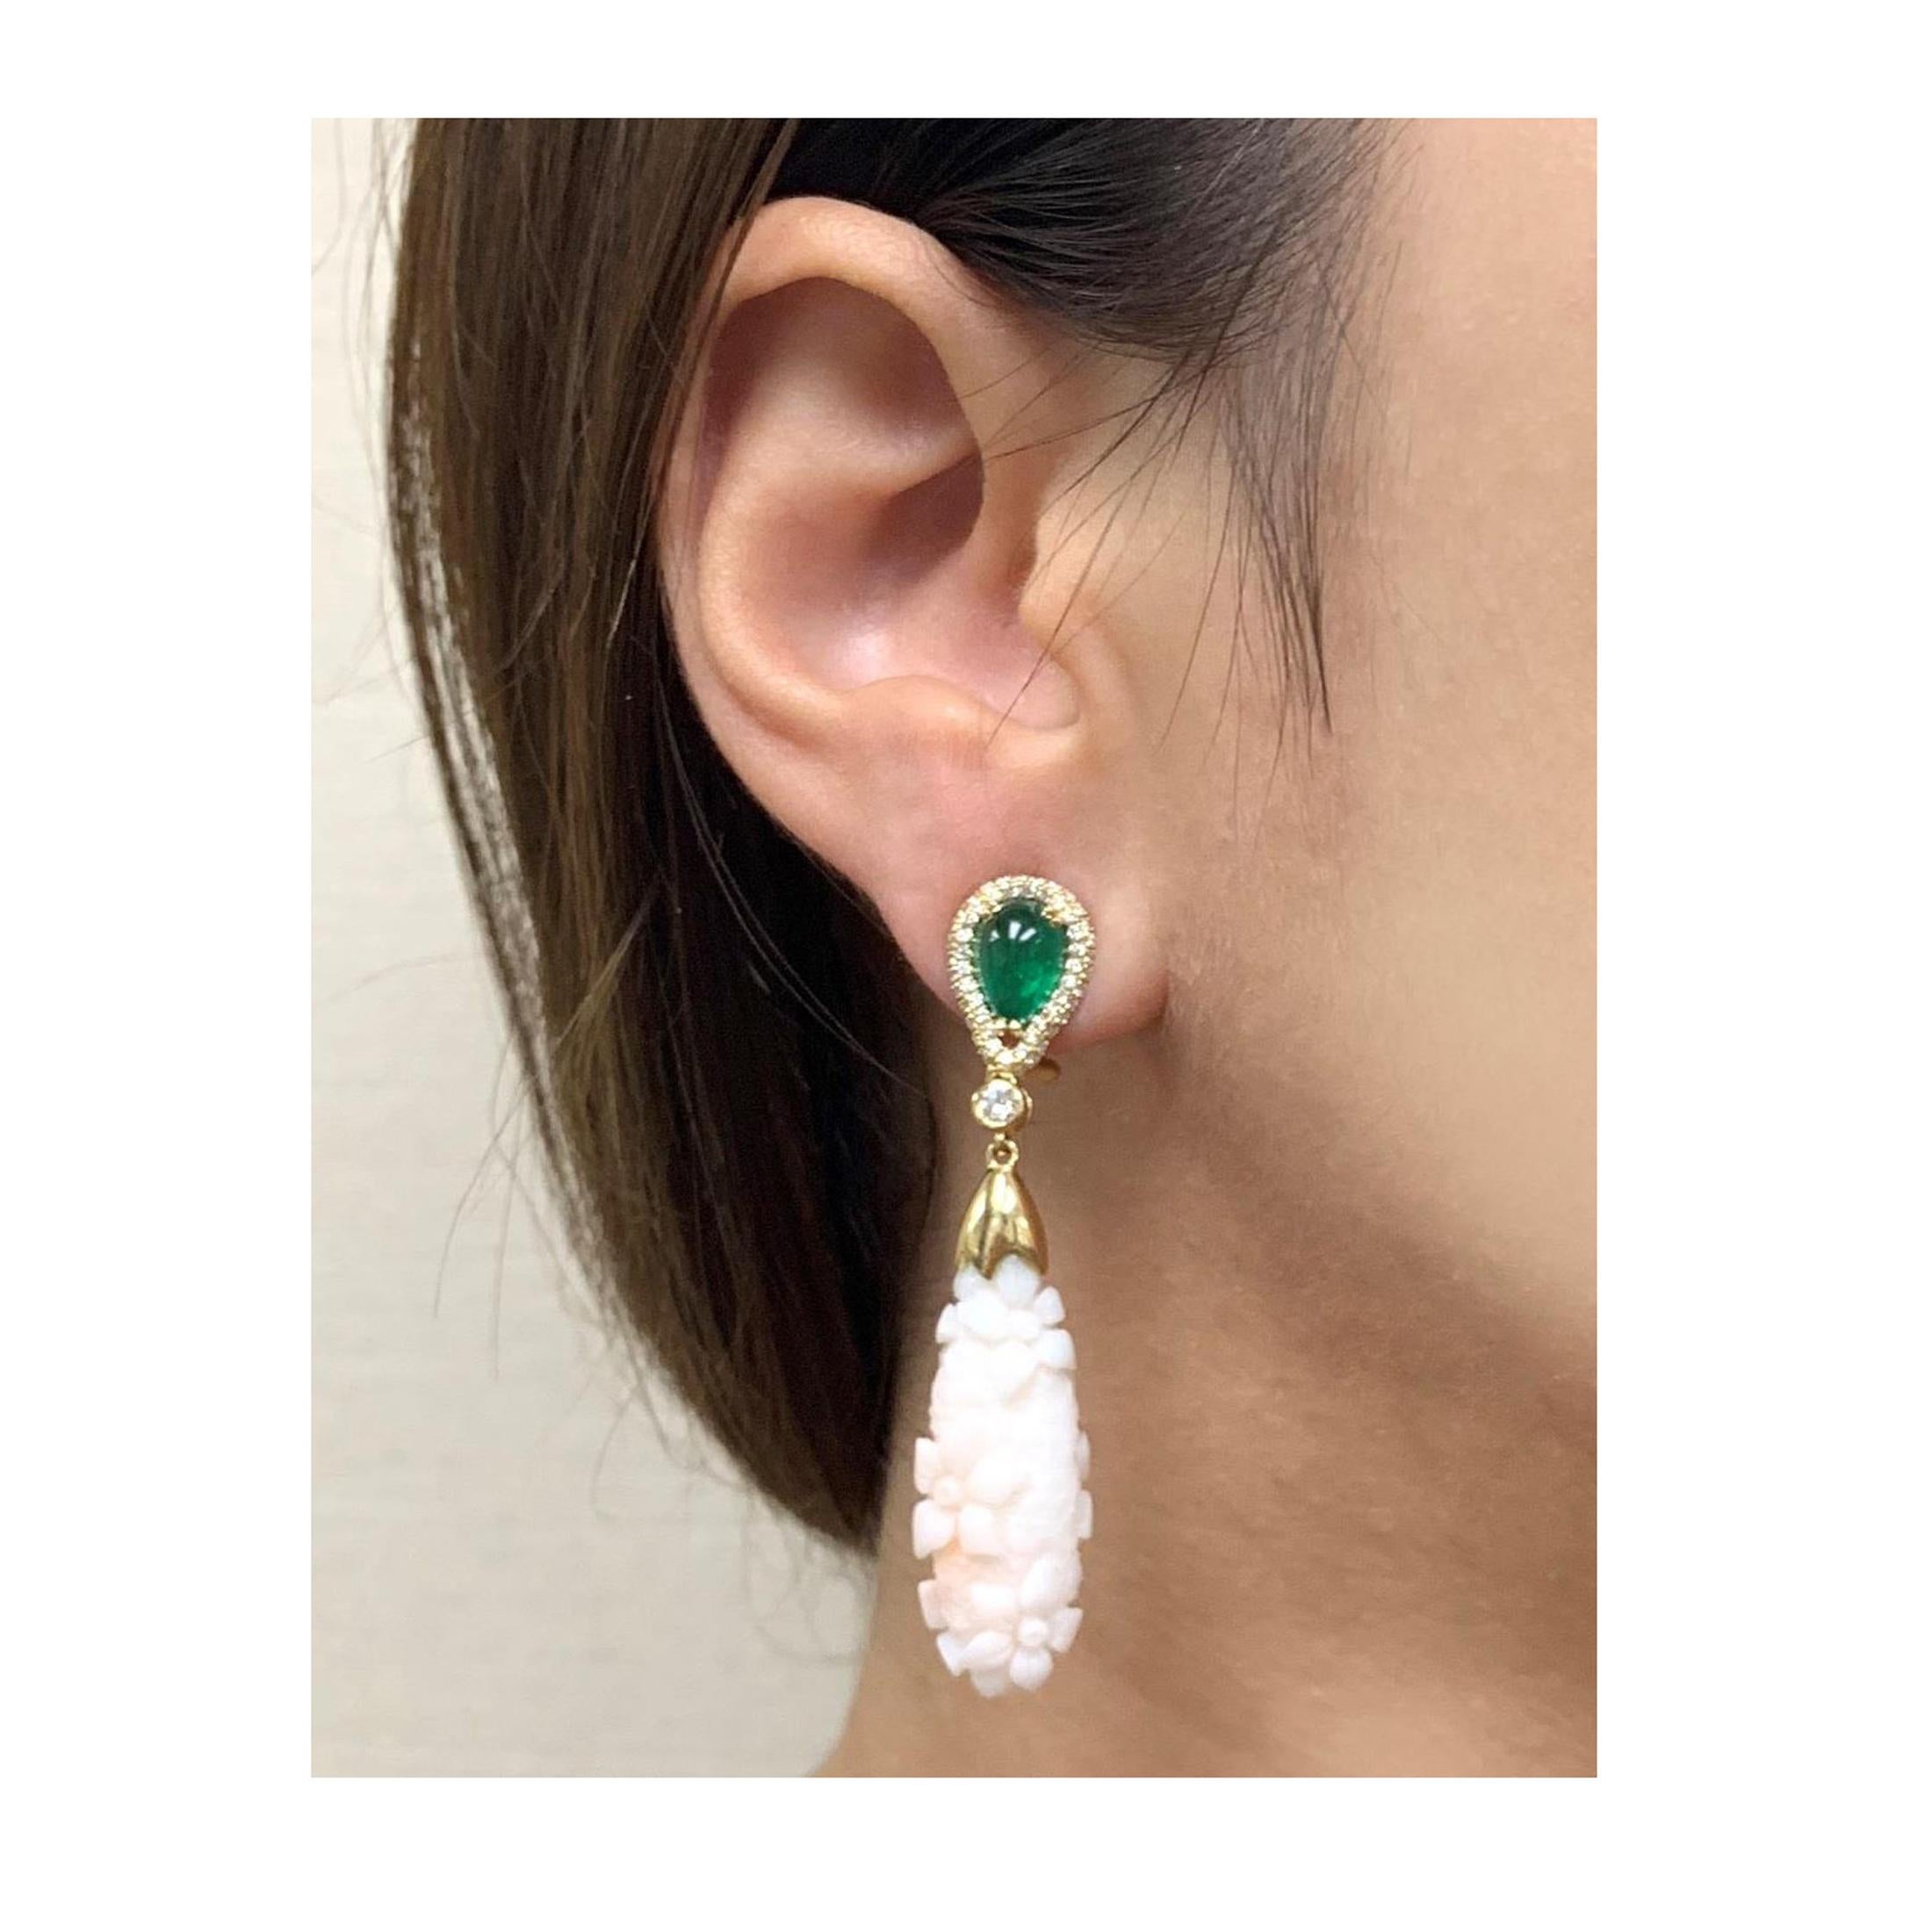 Goshwara, a term for perfect shape, is a company known for exceptional color gems while their G-One collection is made up of exclusive pieces composed of the rarest of gemstones! The intricate carved pattern in the coral drops are accented by